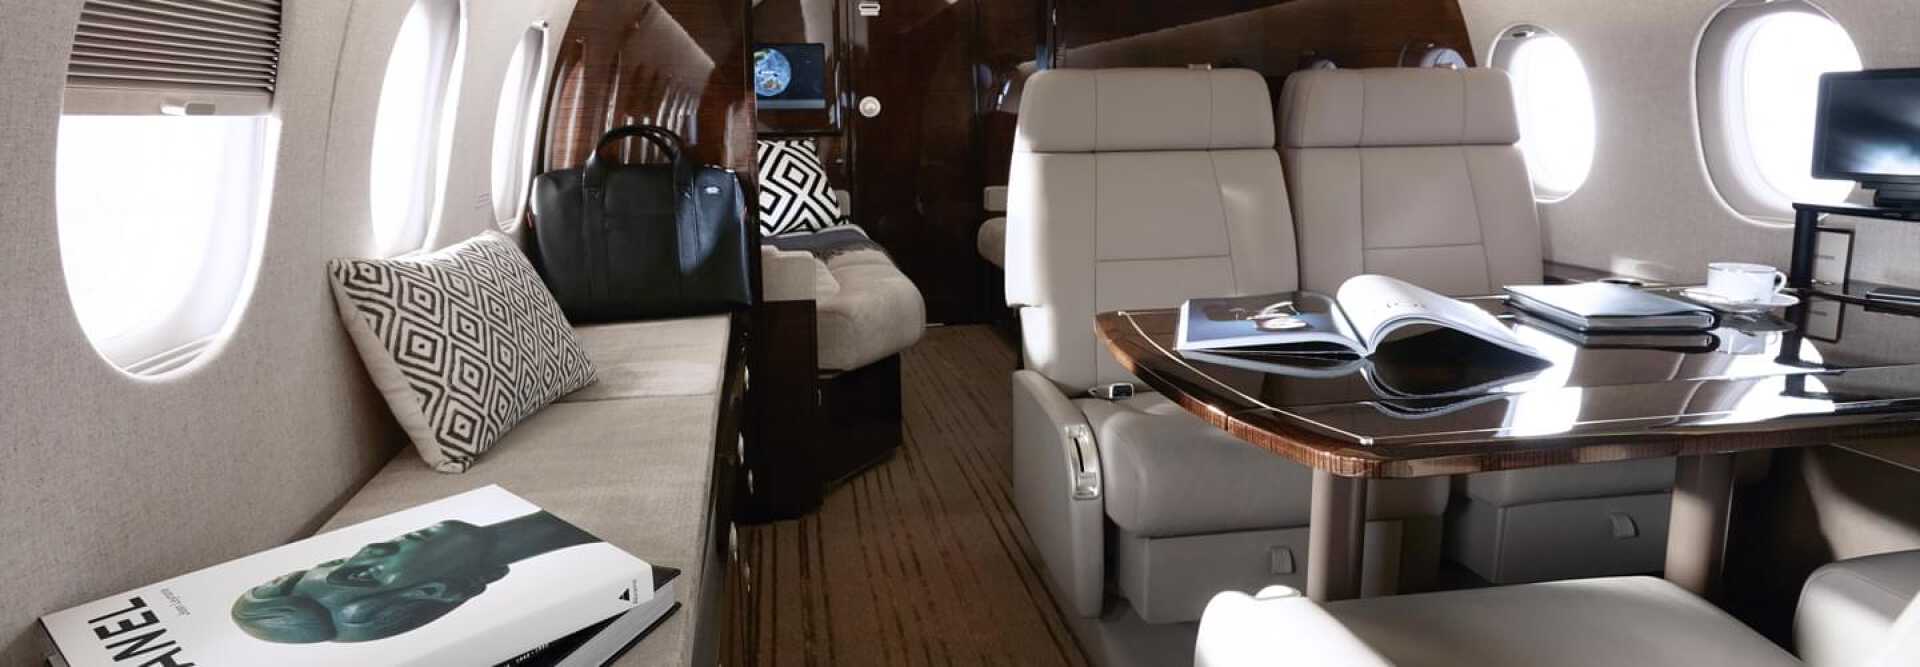 Magazines and newspaper available on board private jets.